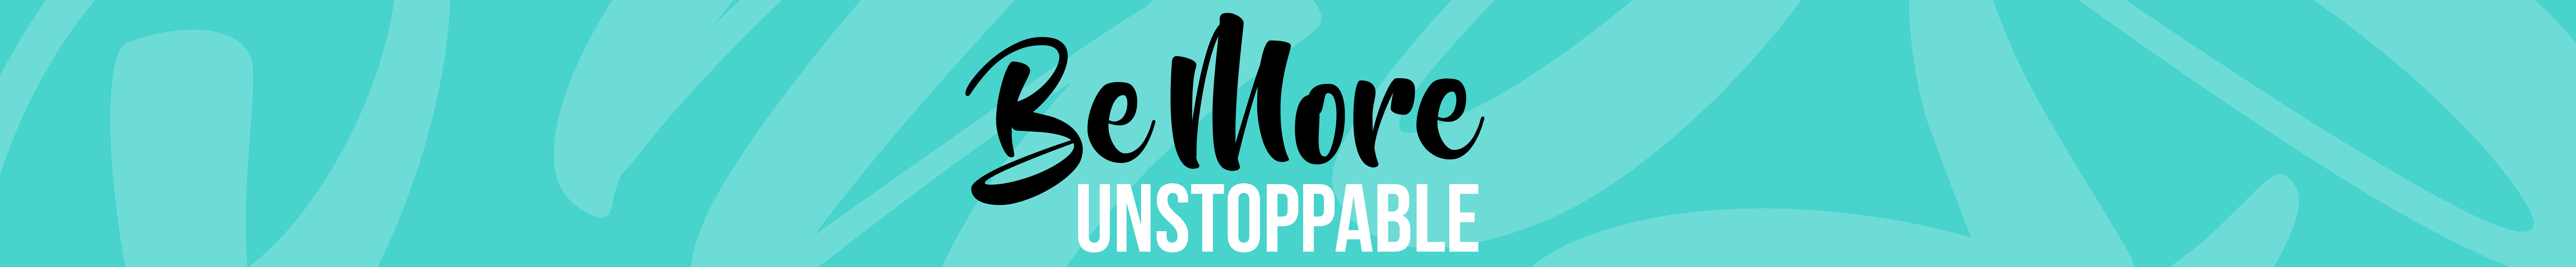 Be More Unstoppable